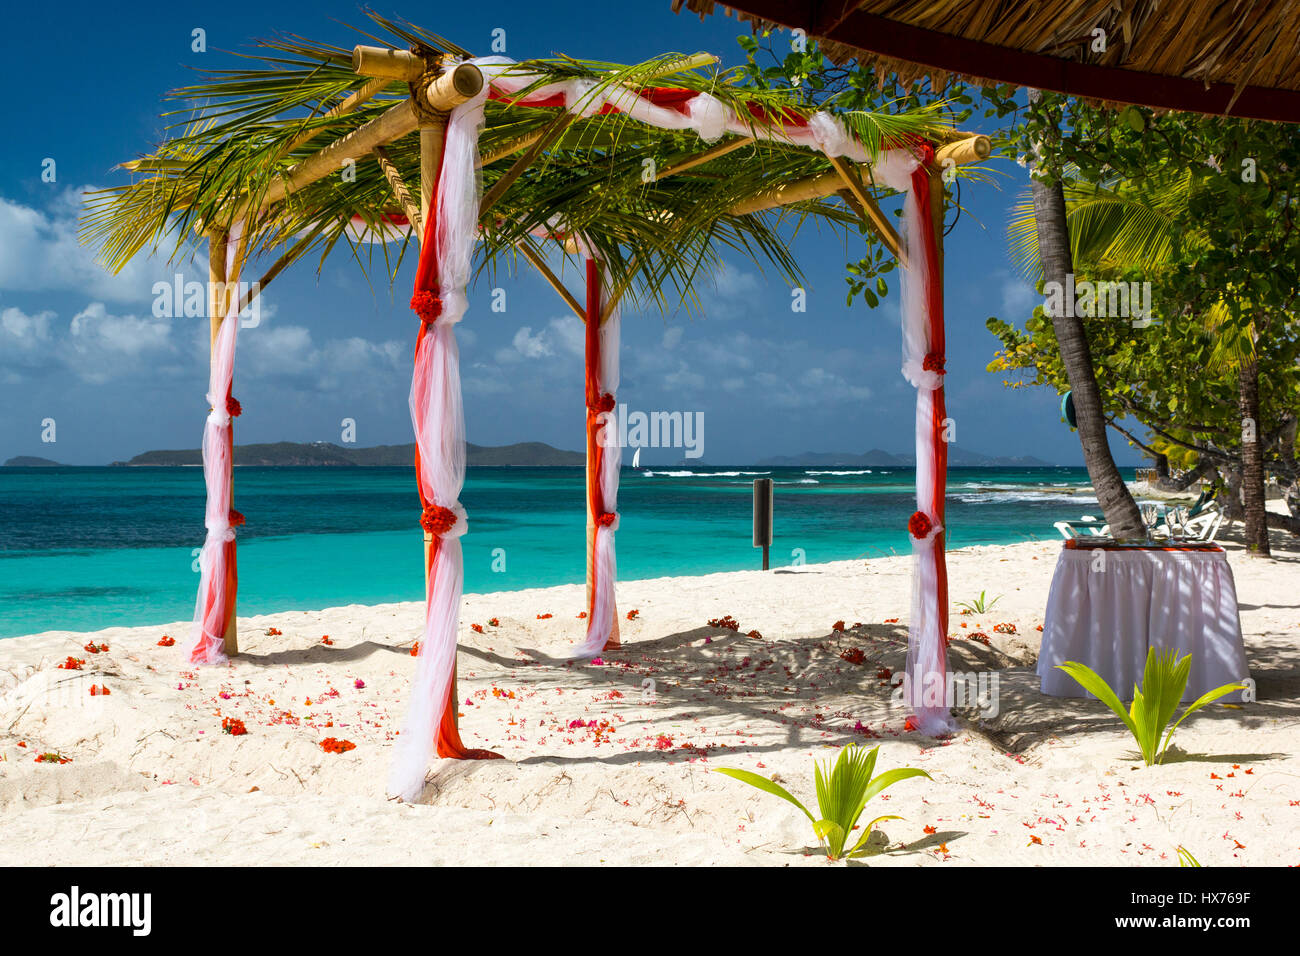 Colourful Beach Wedding Location View: Turquoise Caribbean Ocean and Mayreau. Palm Island, Saint Vincent and the Grenadines. Stock Photo